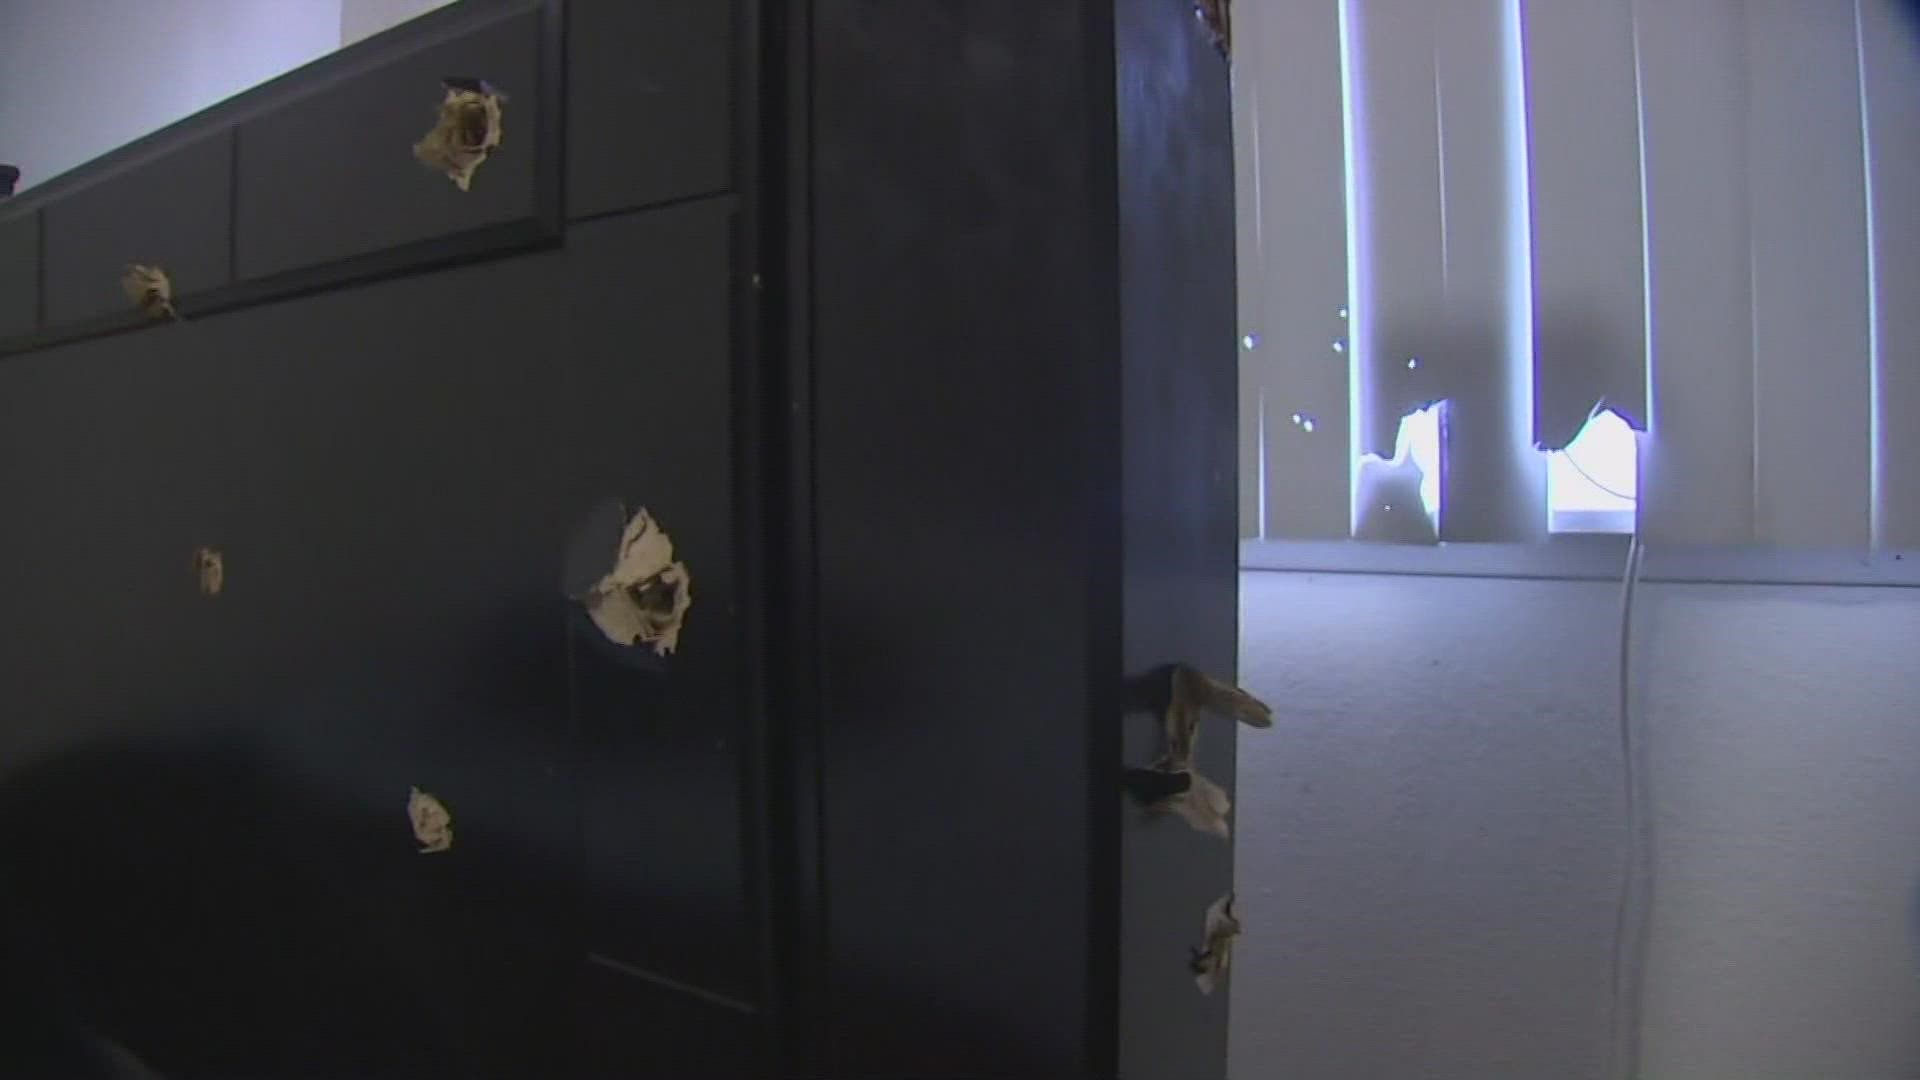 A 63-year-old woman was shot while in bed after bullets came through the wall and window of her Tacoma apartment.